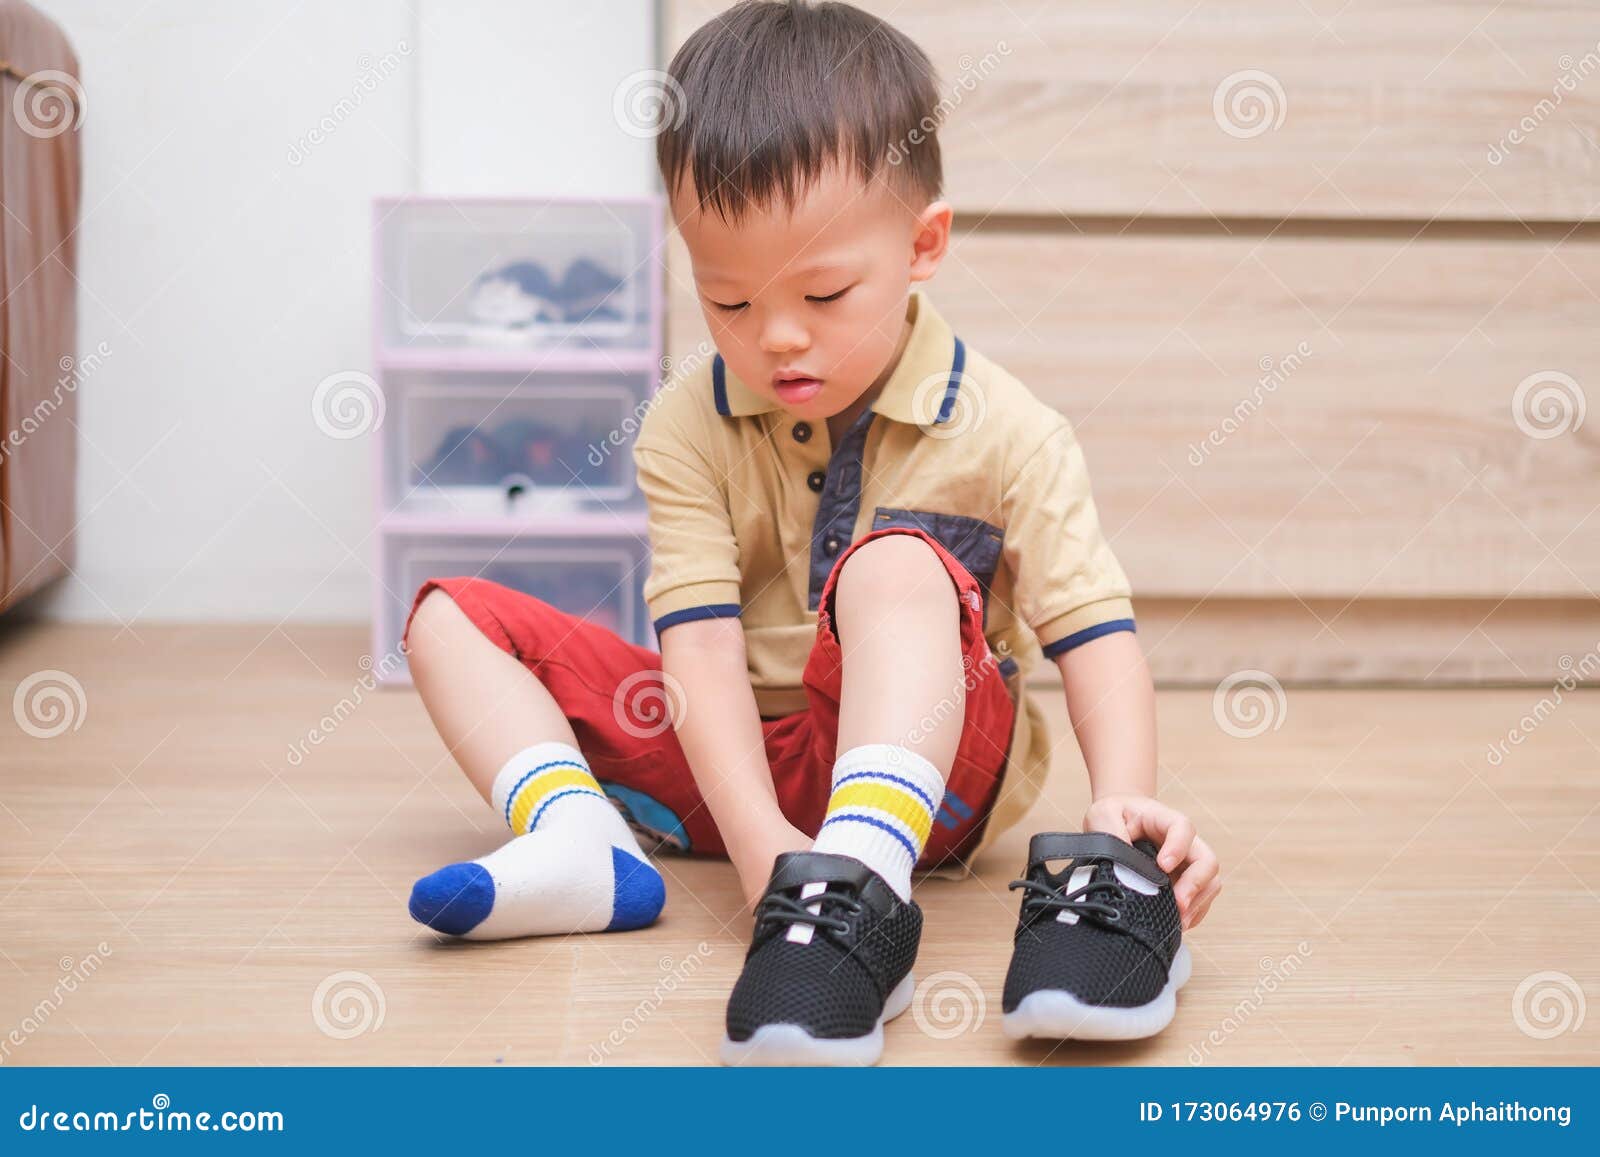 asian 2 - 3 years old toddler boy sitting and concentrate on putting on his black shoes / sneakers